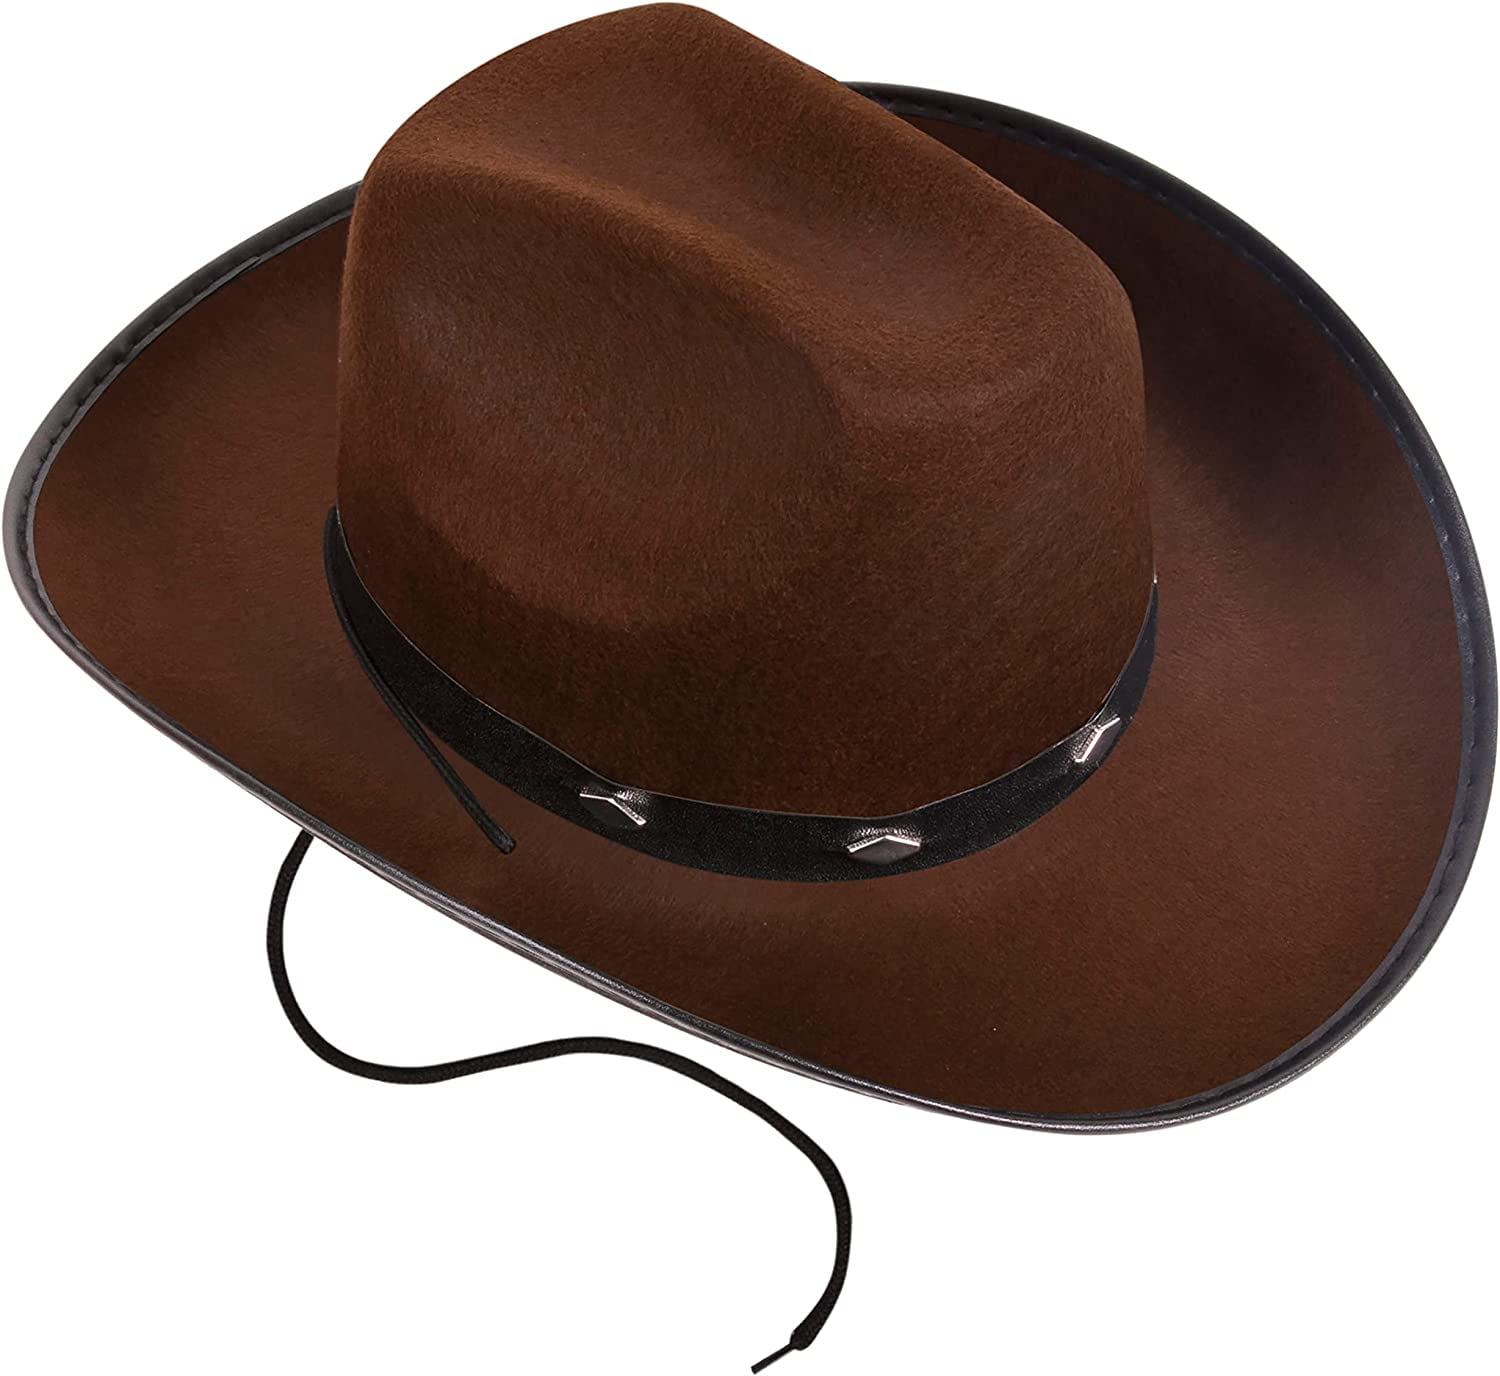 : Spooktacular Creations Black Cowboy Hat, Wide Brim Western  Cowboy Cowgirl Hat for Adults and Kids, Halloween Costume Accessory, Real  Cowboys Costume Parties : Clothing, Shoes & Jewelry